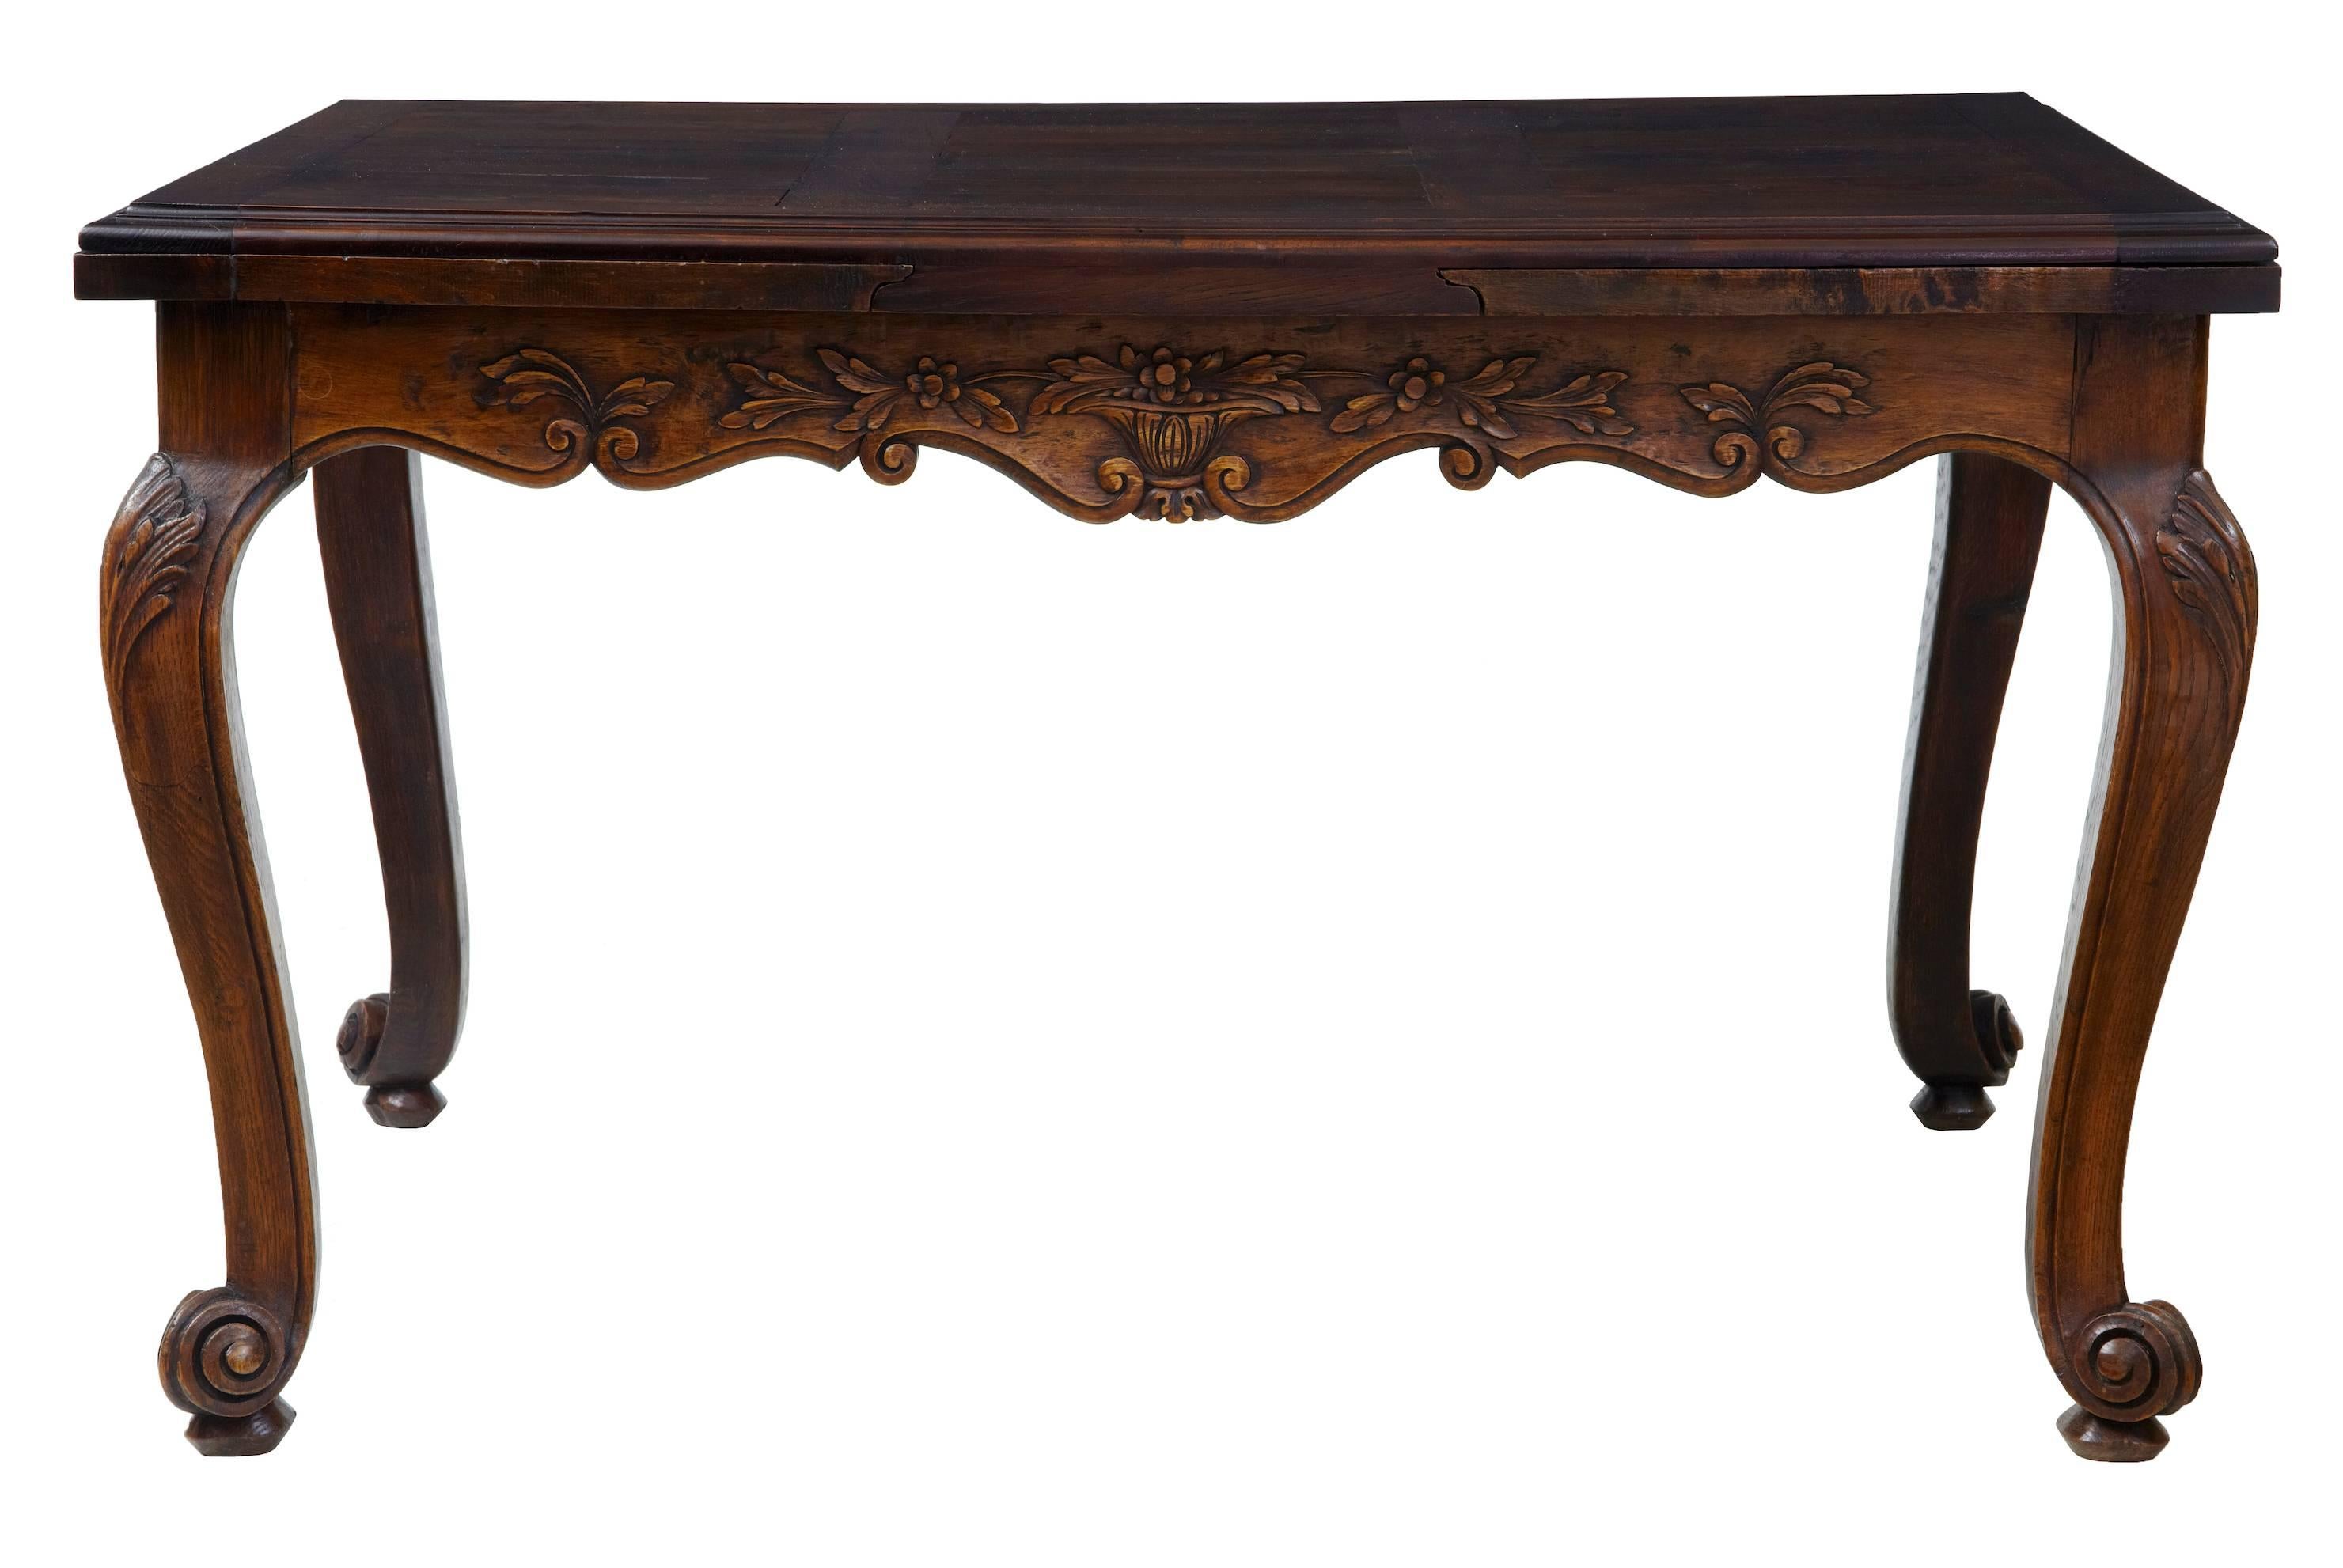 French draw leaf dining table circa 1890.
Plank top with 2 draw leaves.
Carved scrolling apron.
Some marks to top.

Height: 30 1/3